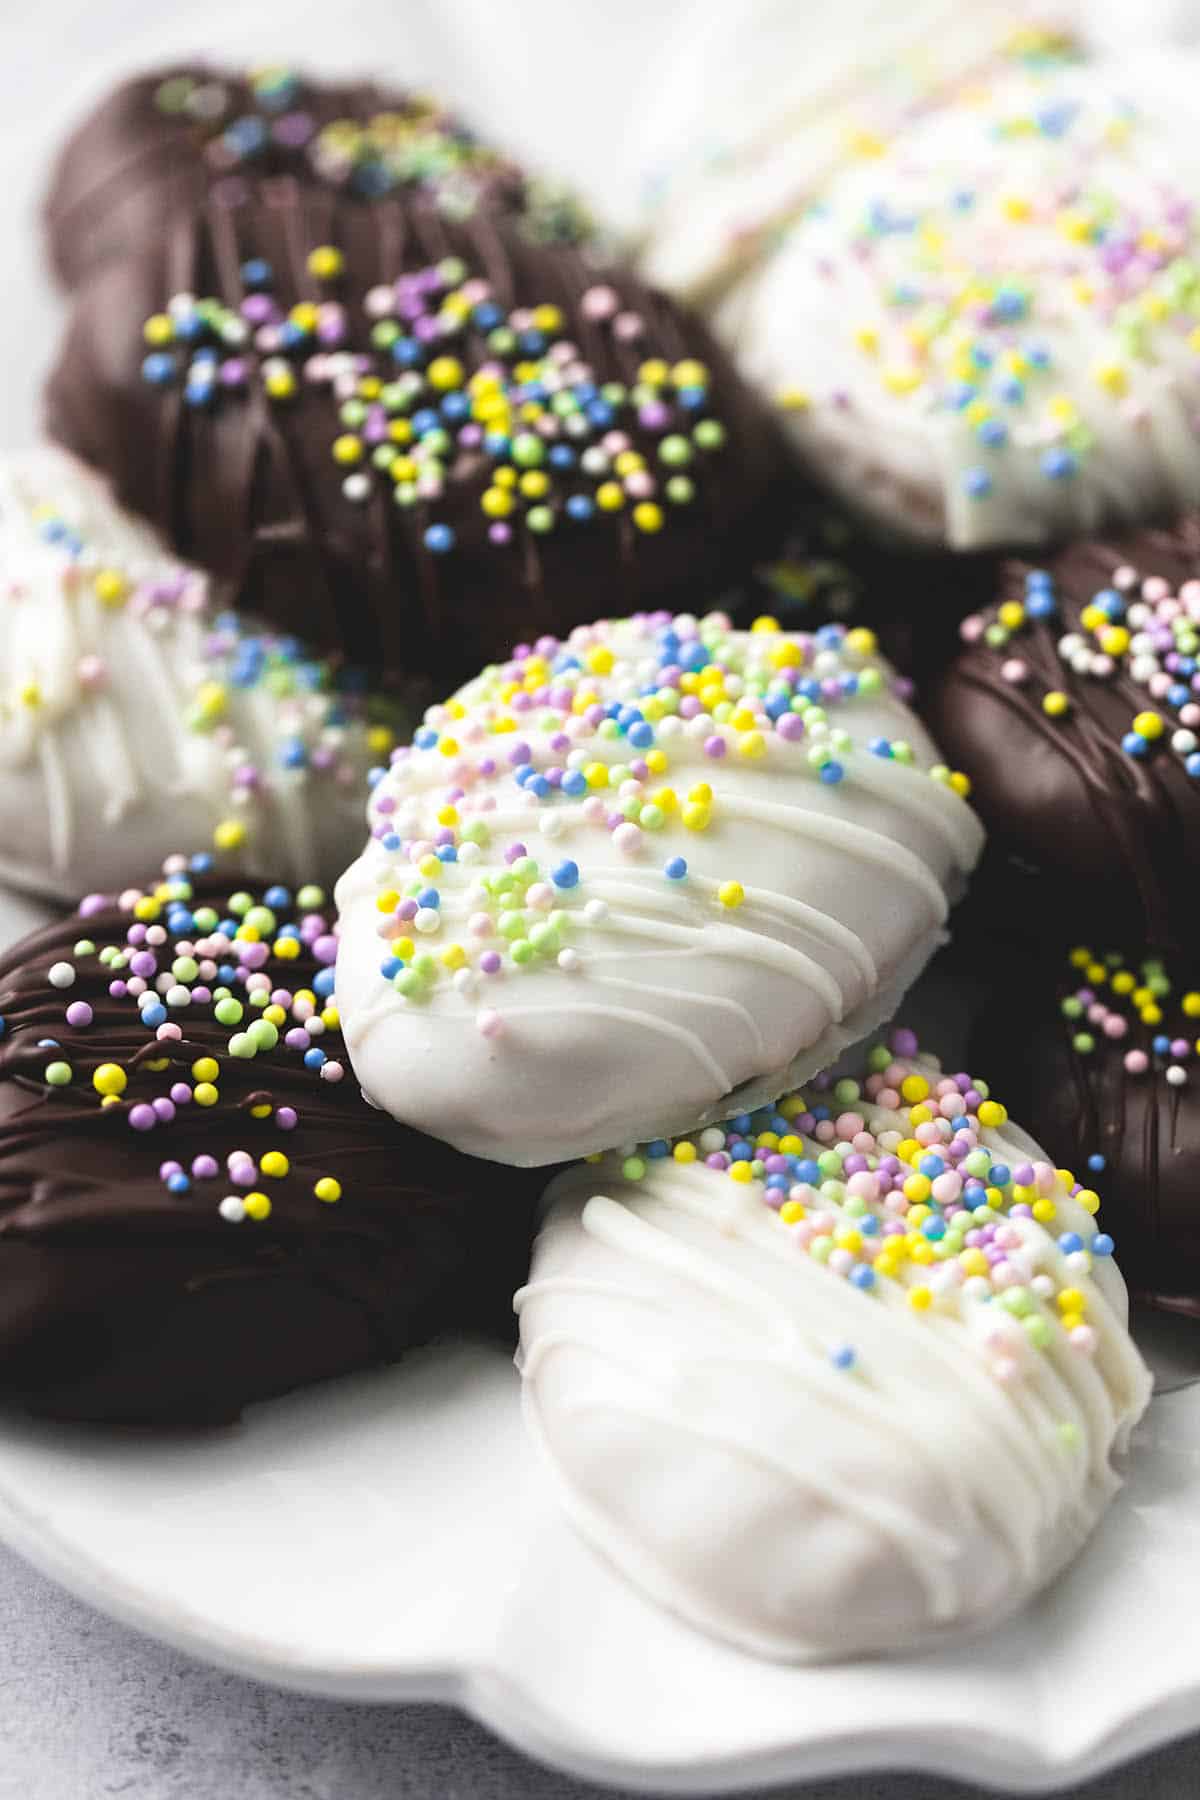 close up of copycat Reese's creamy peanut butter eggs on a plate.